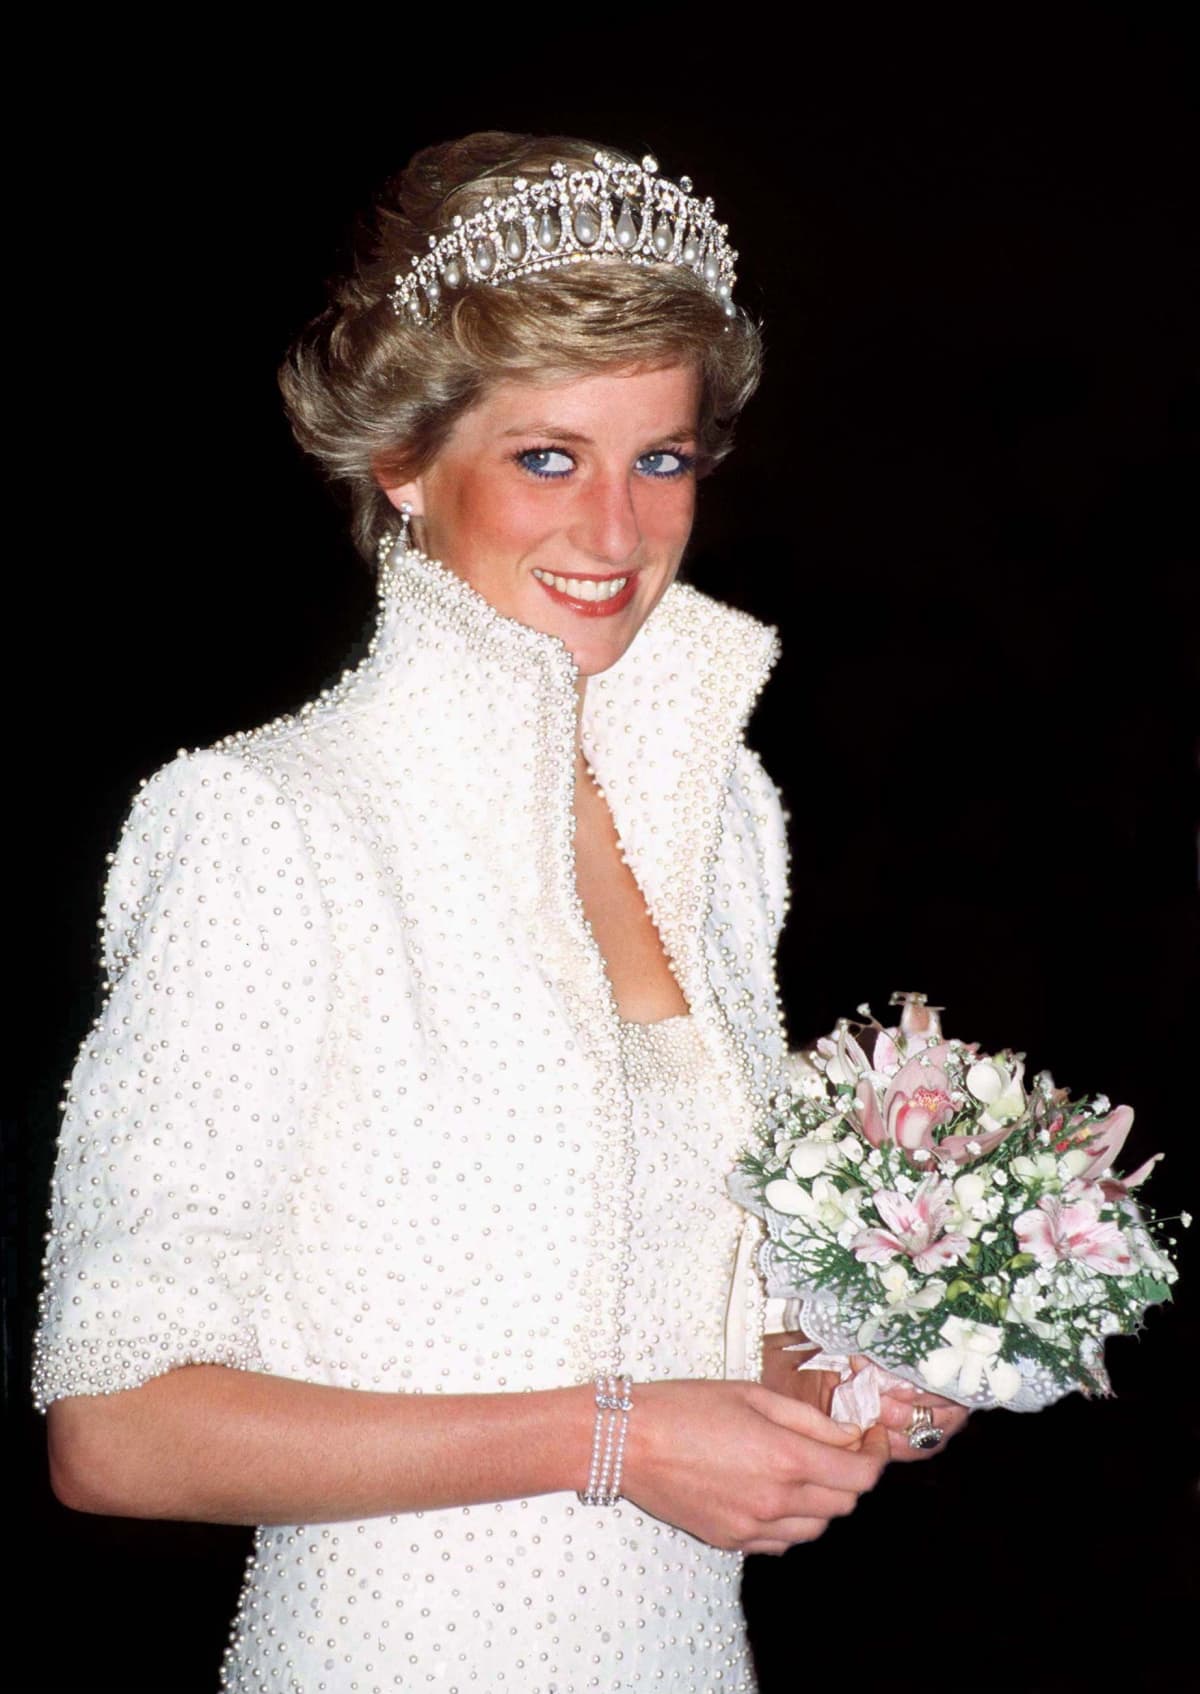 ARGENTINA - NOVEMBER 24:  Princess Diana In Argentina  (Photo by Tim Graham Photo Library via Getty Images)